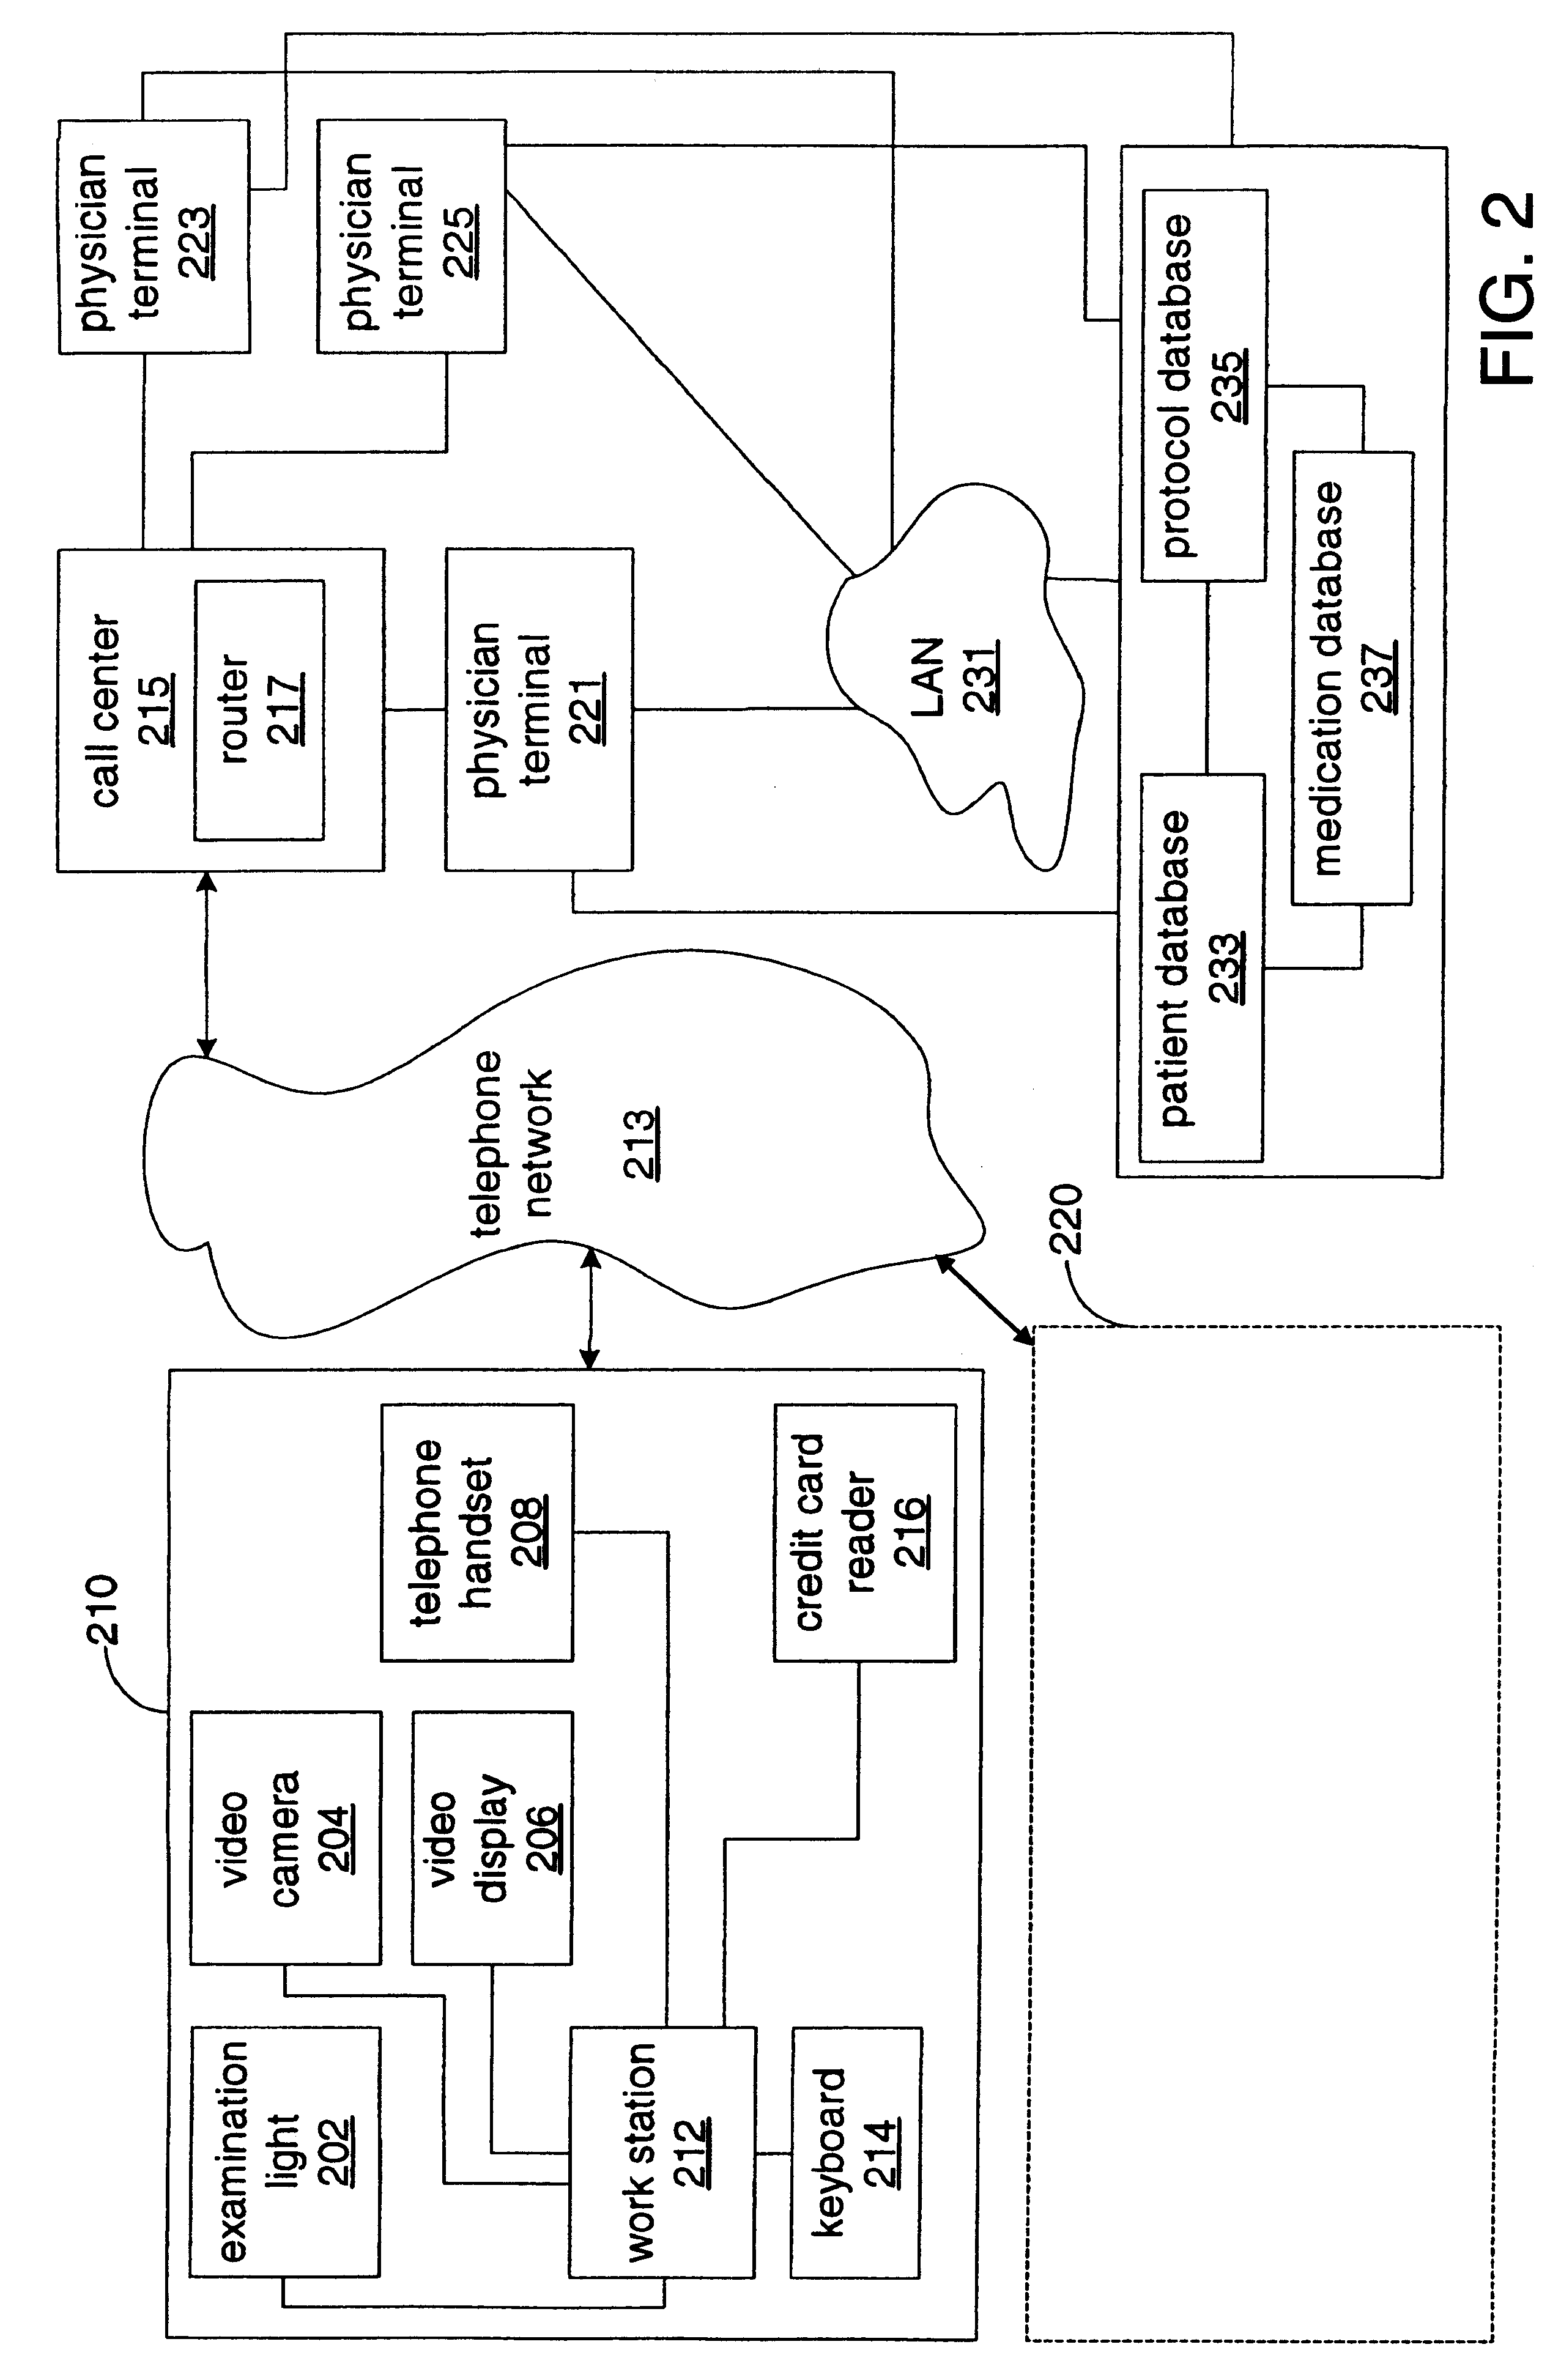 System and method for delivering medical examination, diagnosis, and treatment over a network